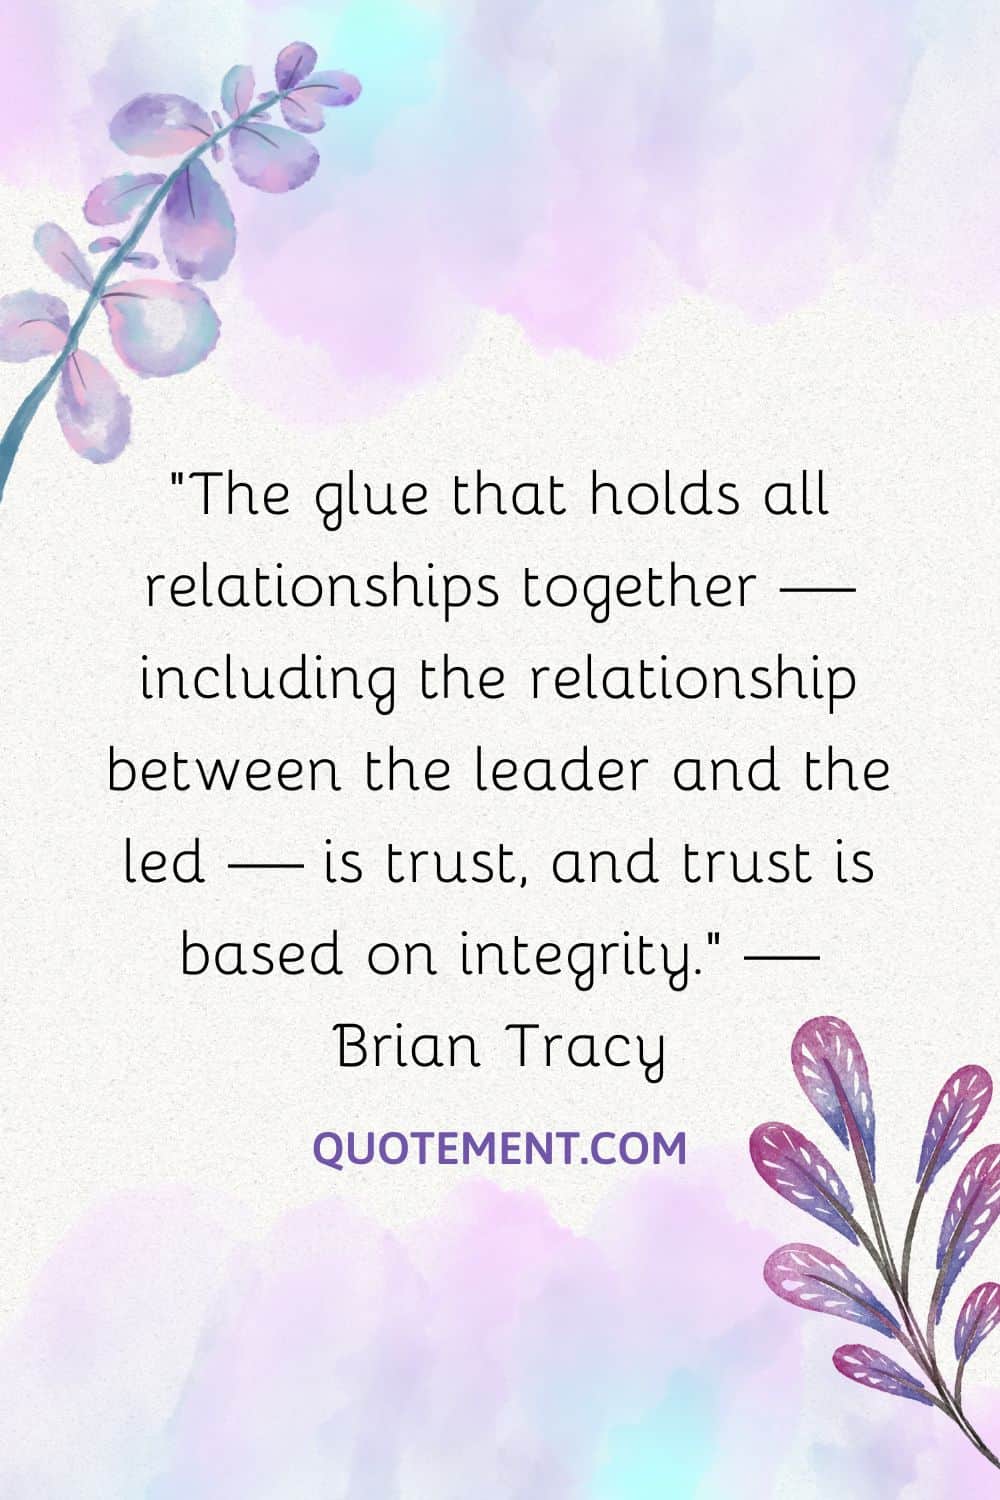 The glue that holds all relationships together